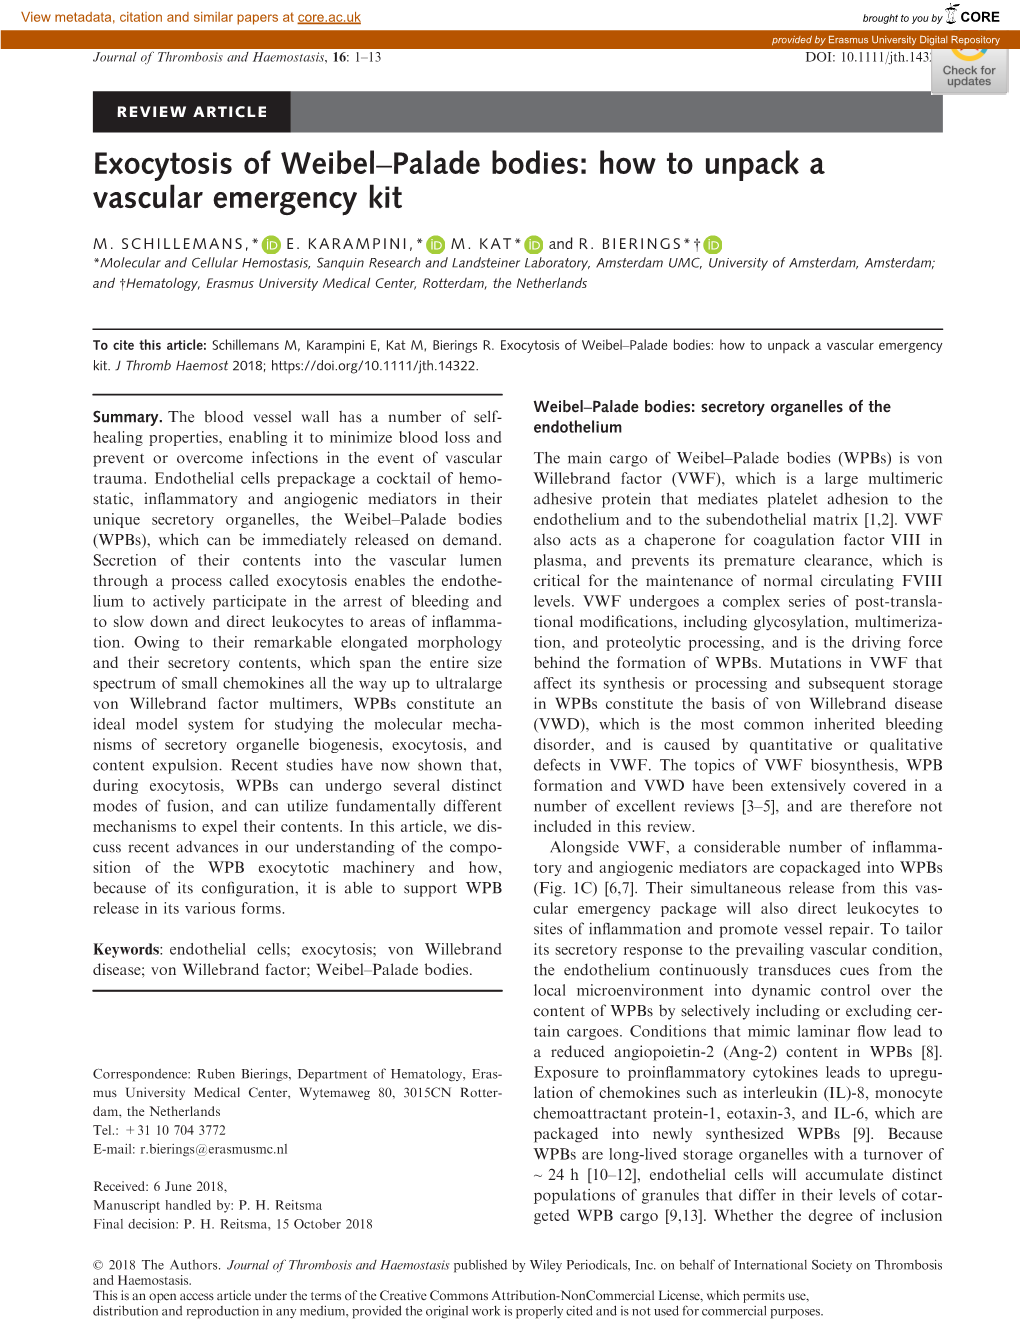 Exocytosis of Weibel–Palade Bodies: How to Unpack a Vascular Emergency Kit